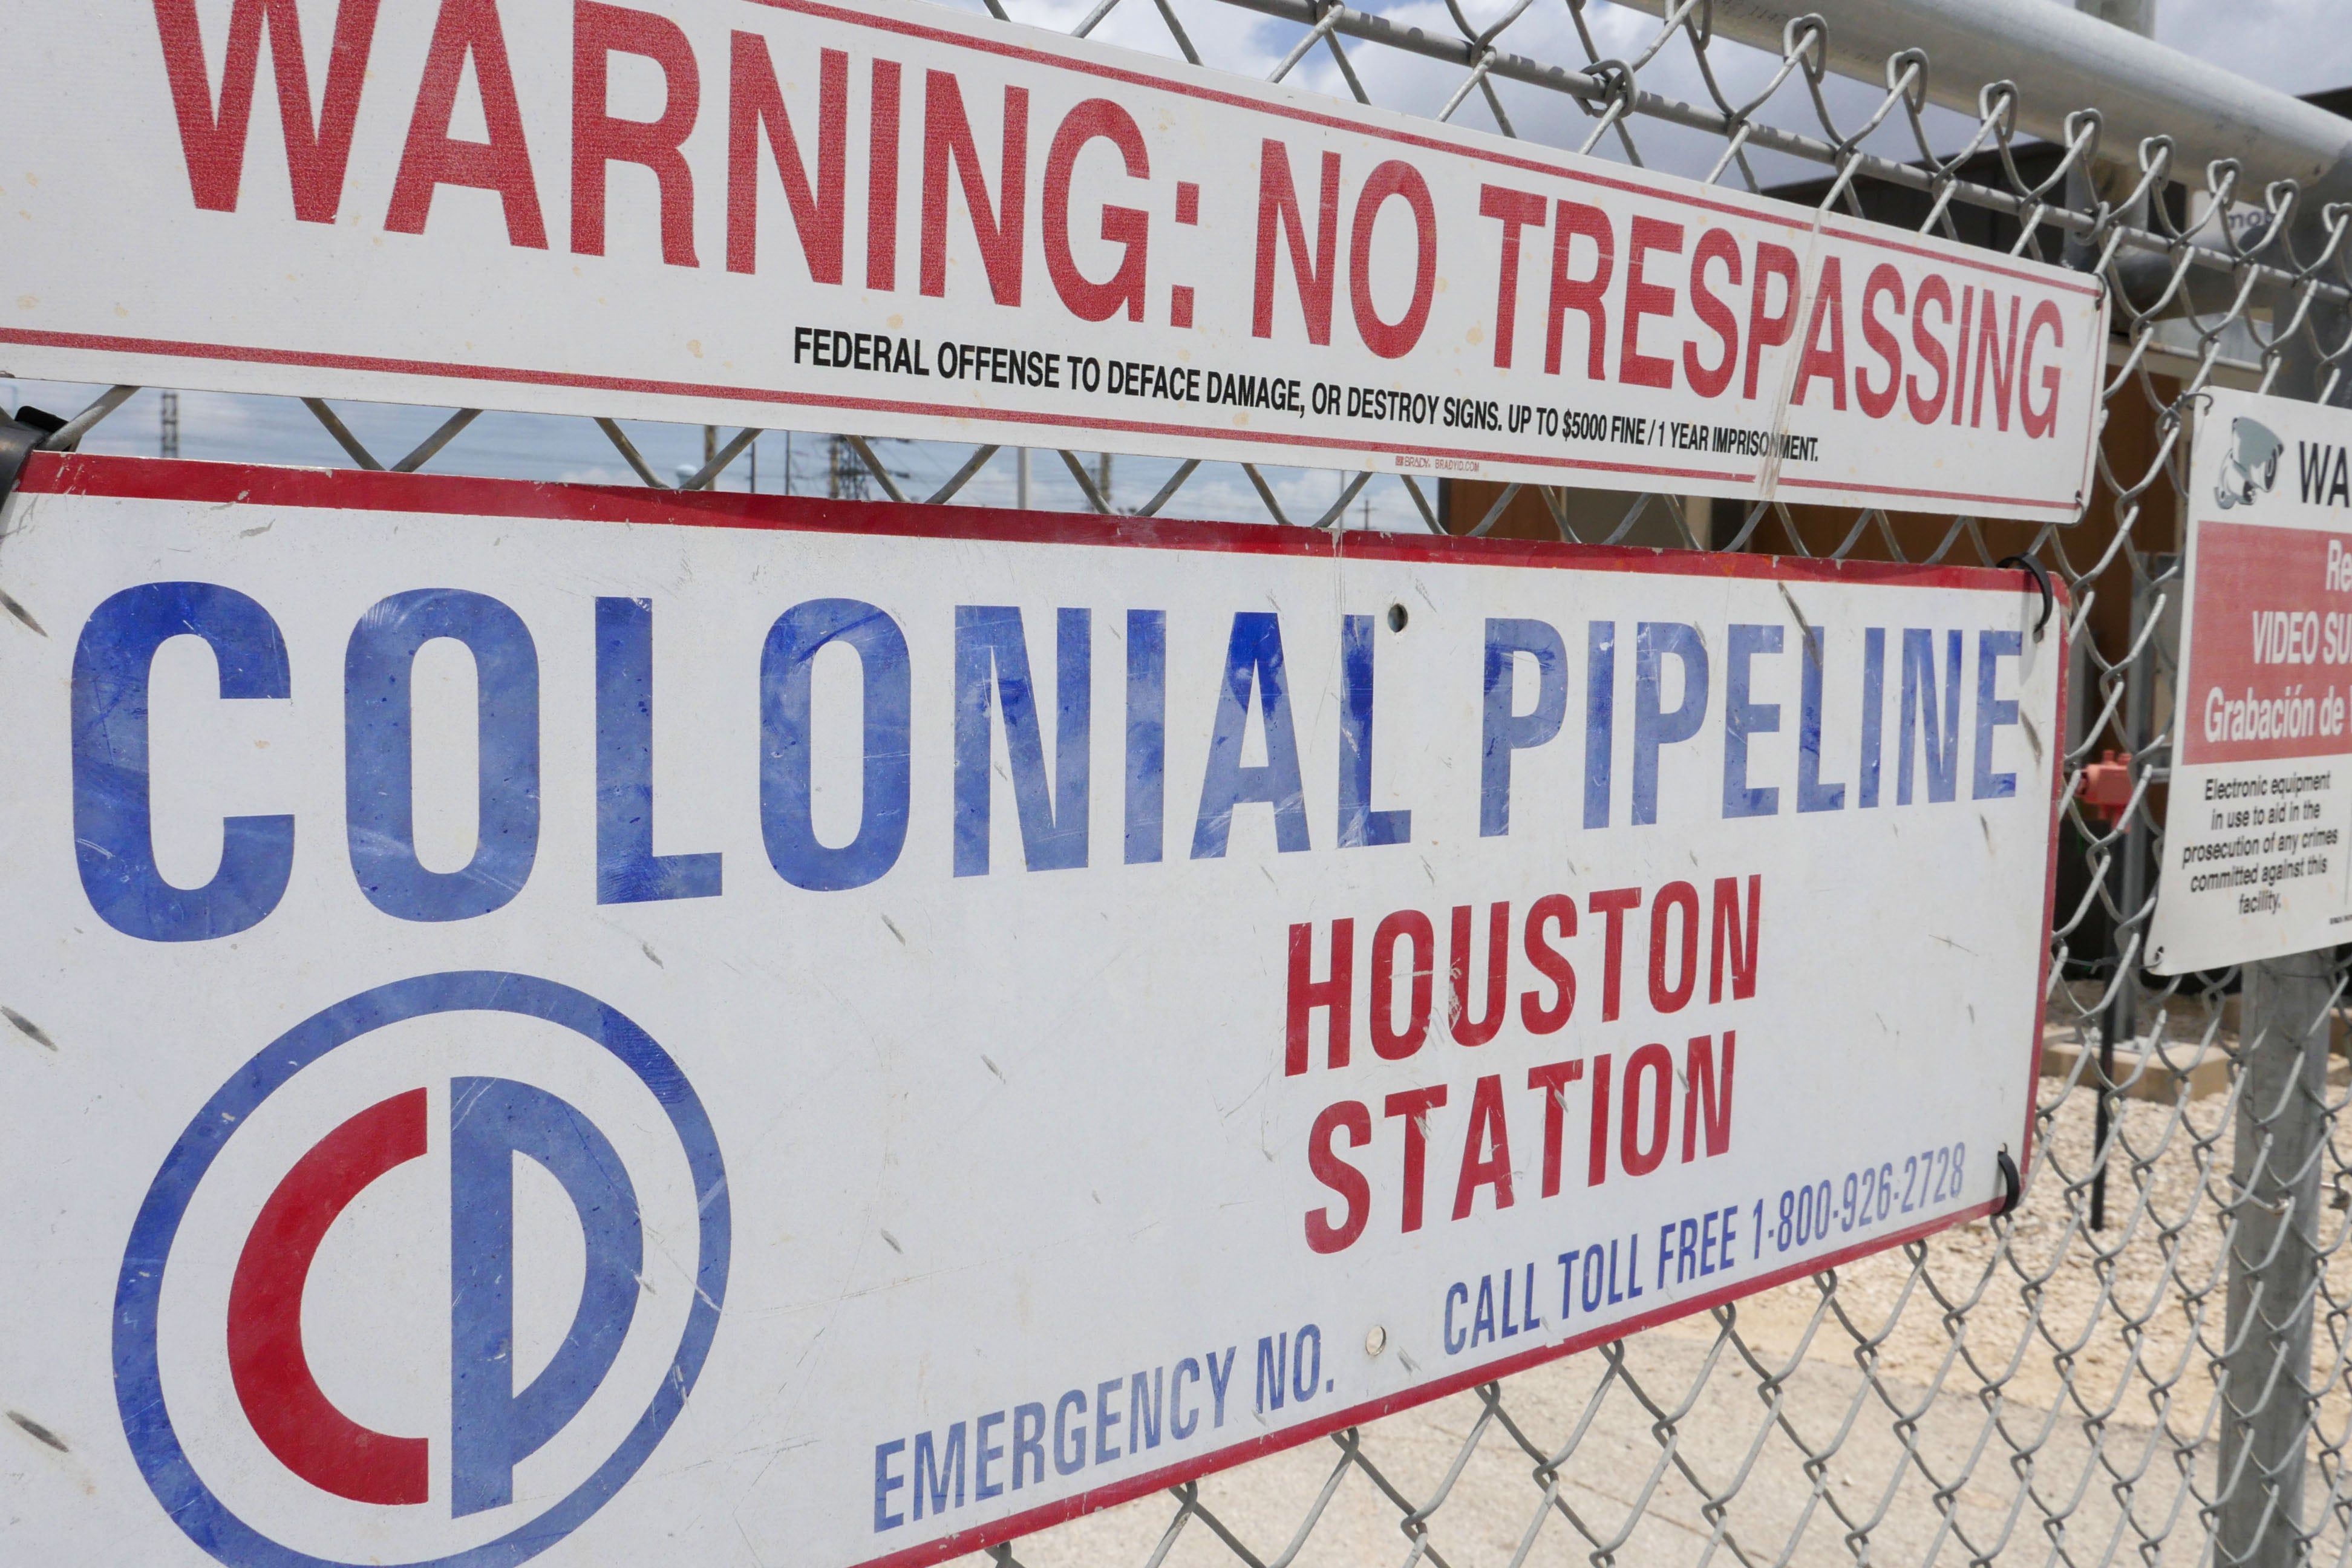 Colonial Pipeline CEO Joseph Blout has defended paying ransom to Russian hackers